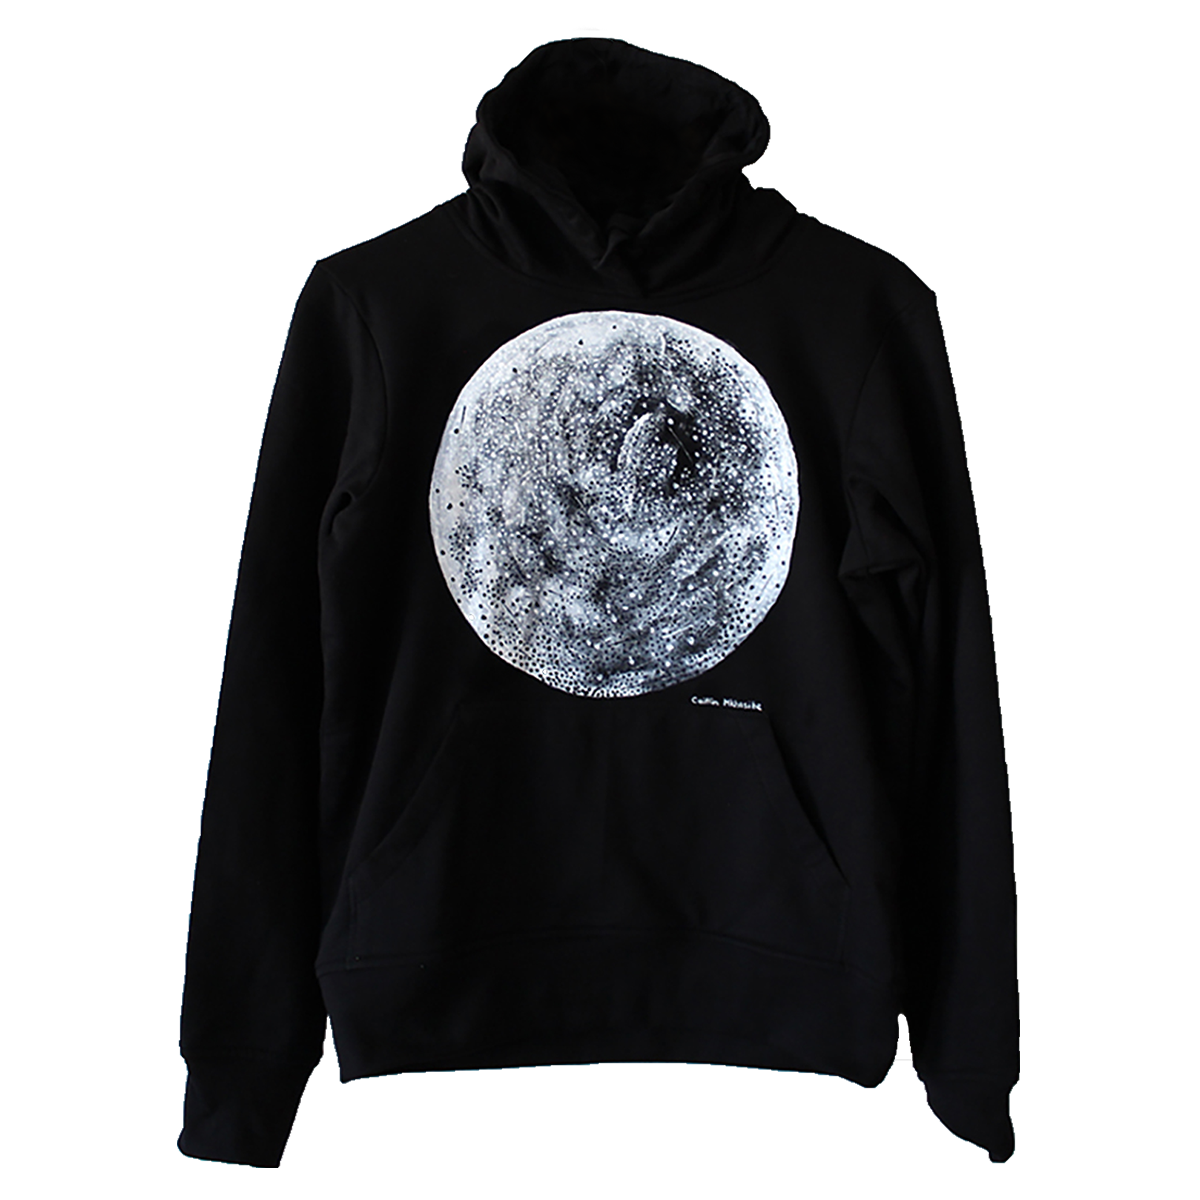 Hand-painted Moon Hoodie (Unisex) by Caitlin Mkhasibe